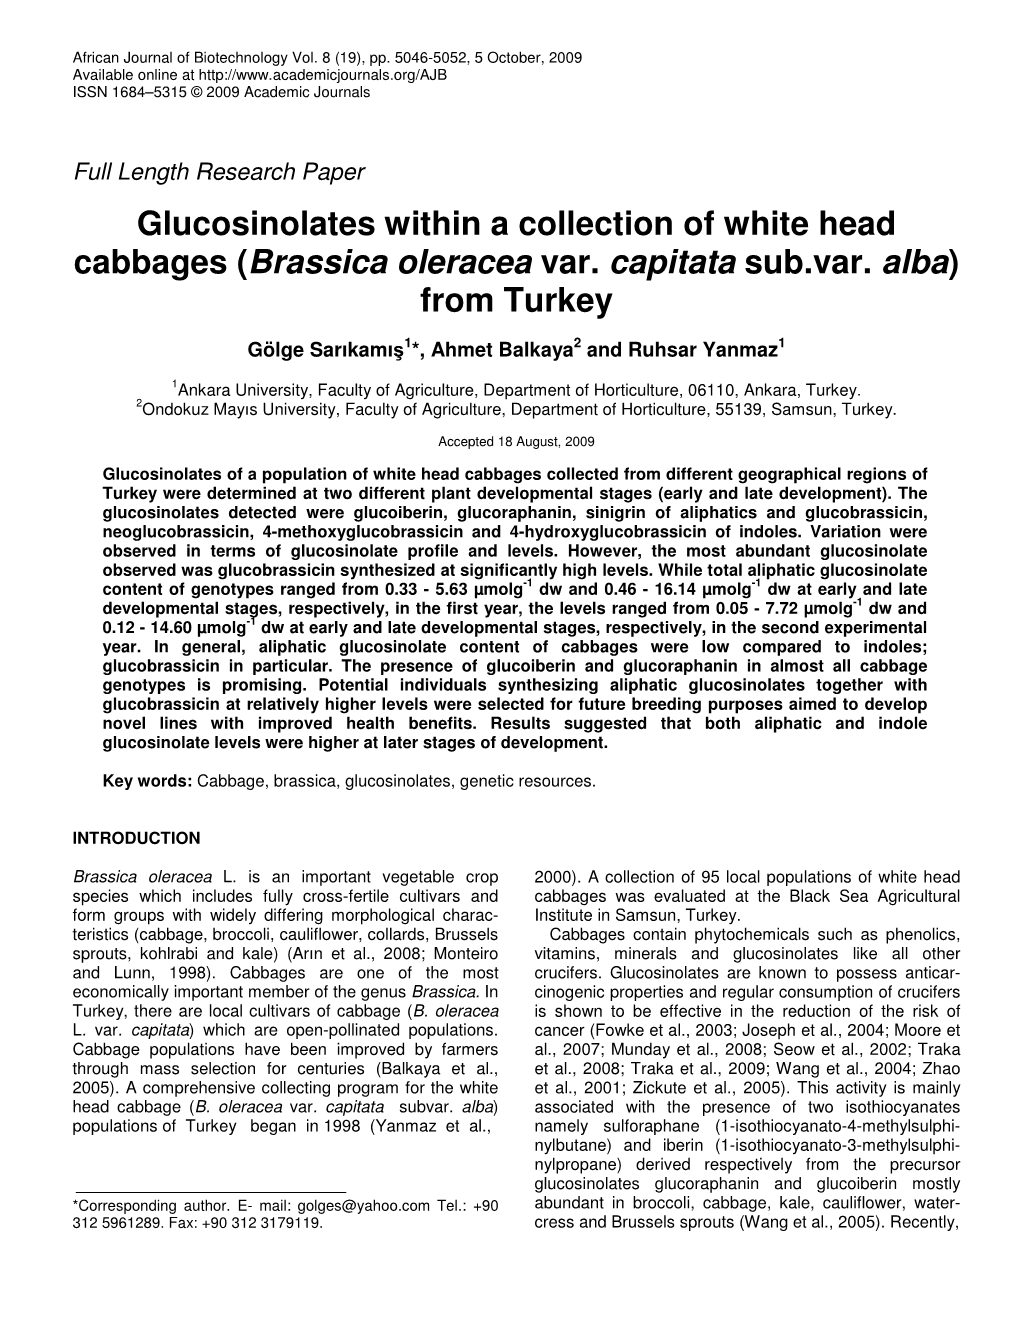 Glucosinolates Within a Collection of White Head Cabbages (Brassica Oleracea Var